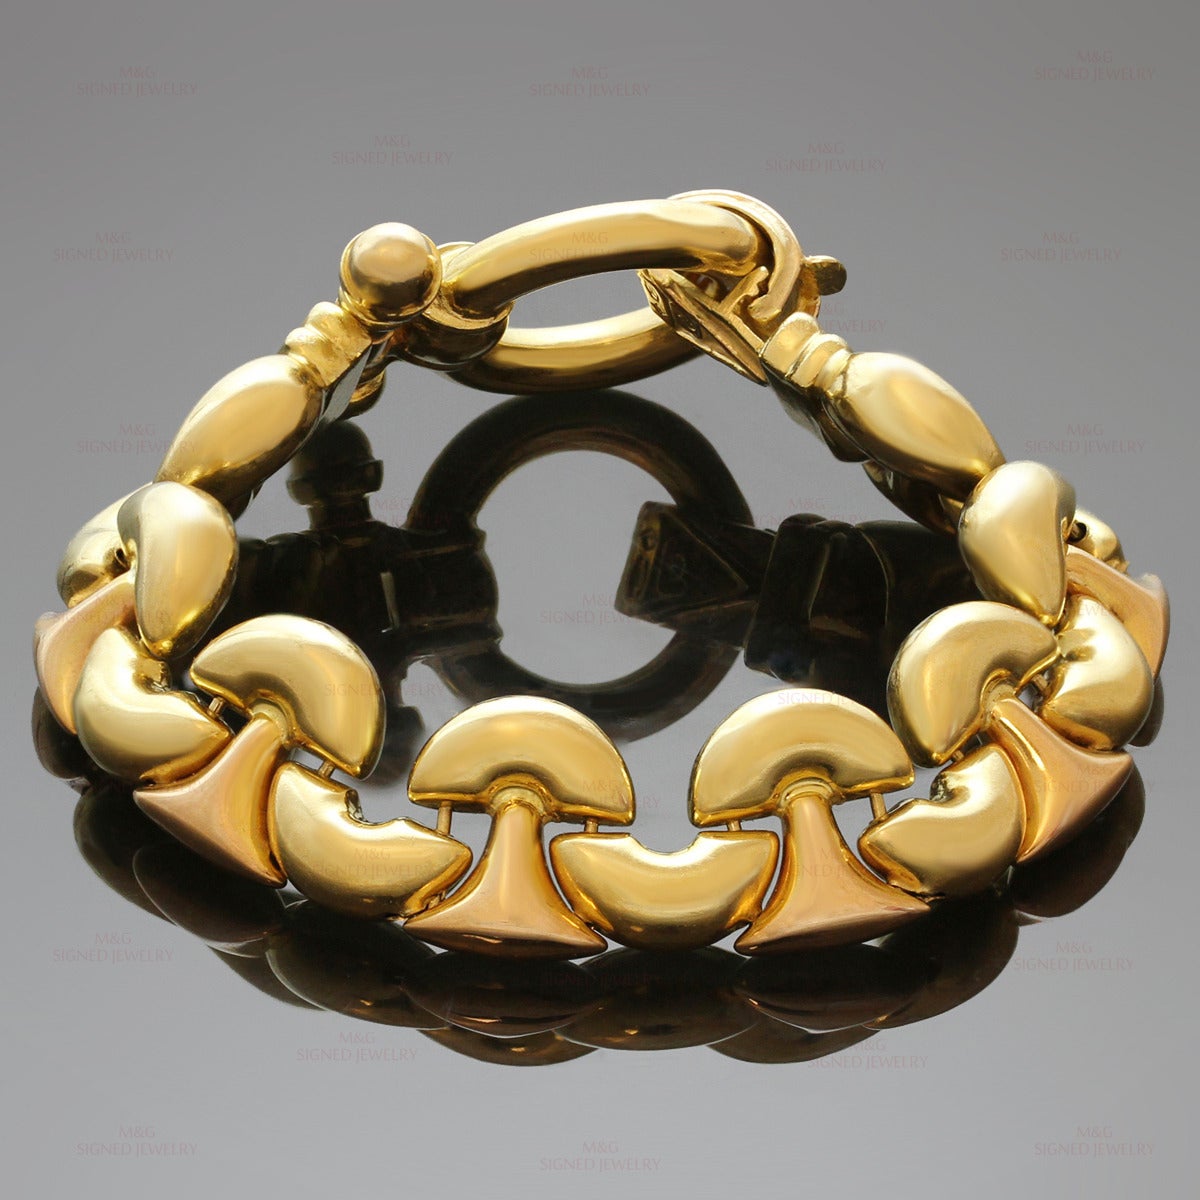 This classic Italian bracelet features geometric links made in 18k yellow gold and completed with a toggle clasp. Measurements: 0.59